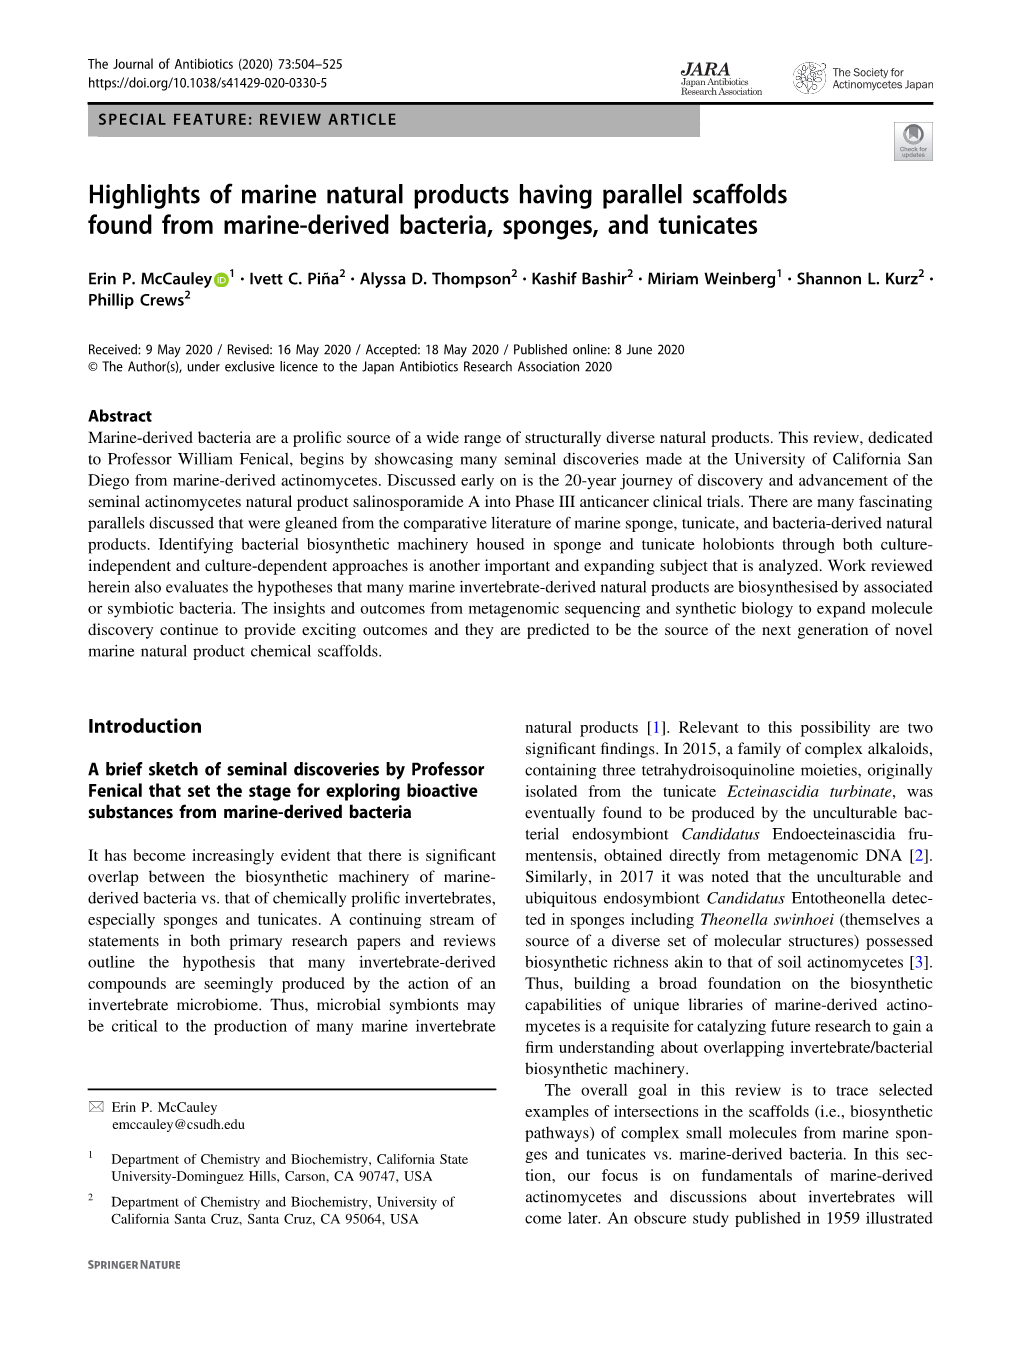 Highlights of Marine Natural Products Having Parallel Scaffolds Found from Marine-Derived Bacteria, Sponges, and Tunicates